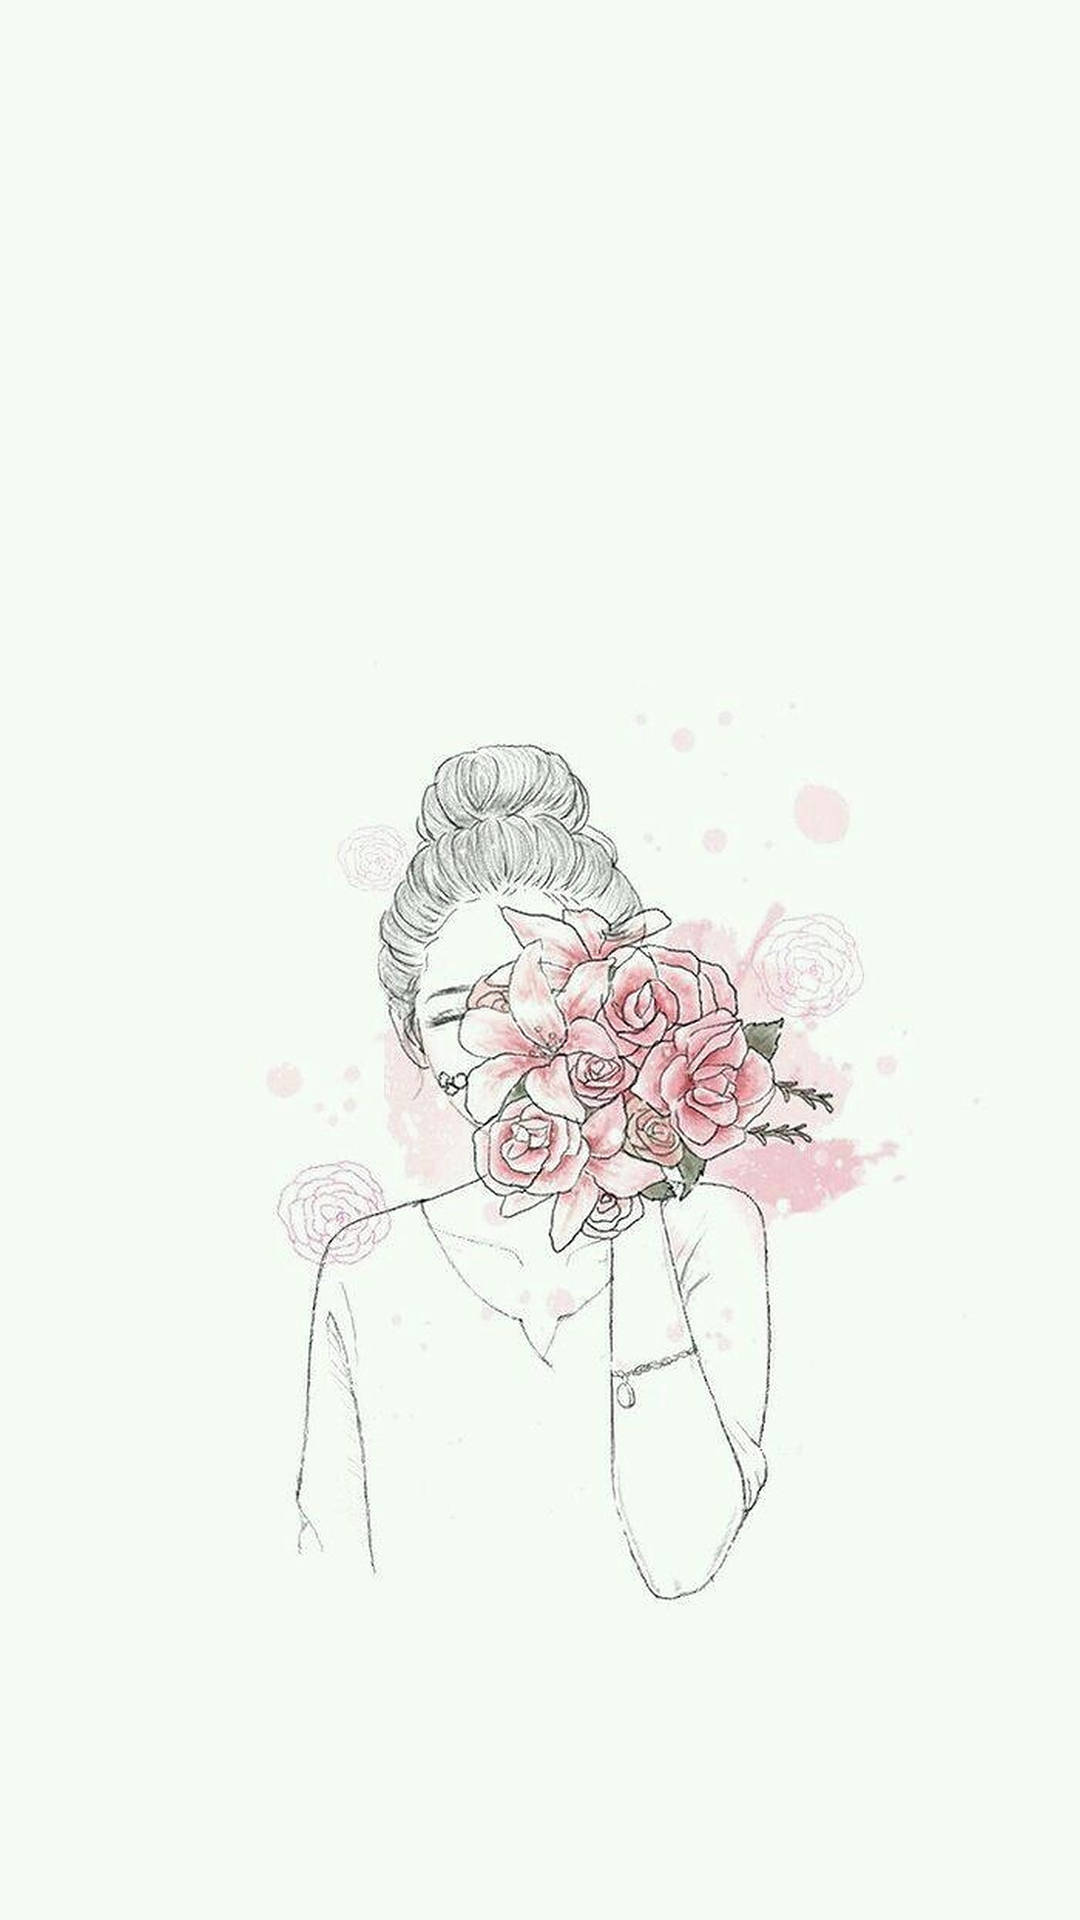 Aesthetic Girl With Pink Flowers Background